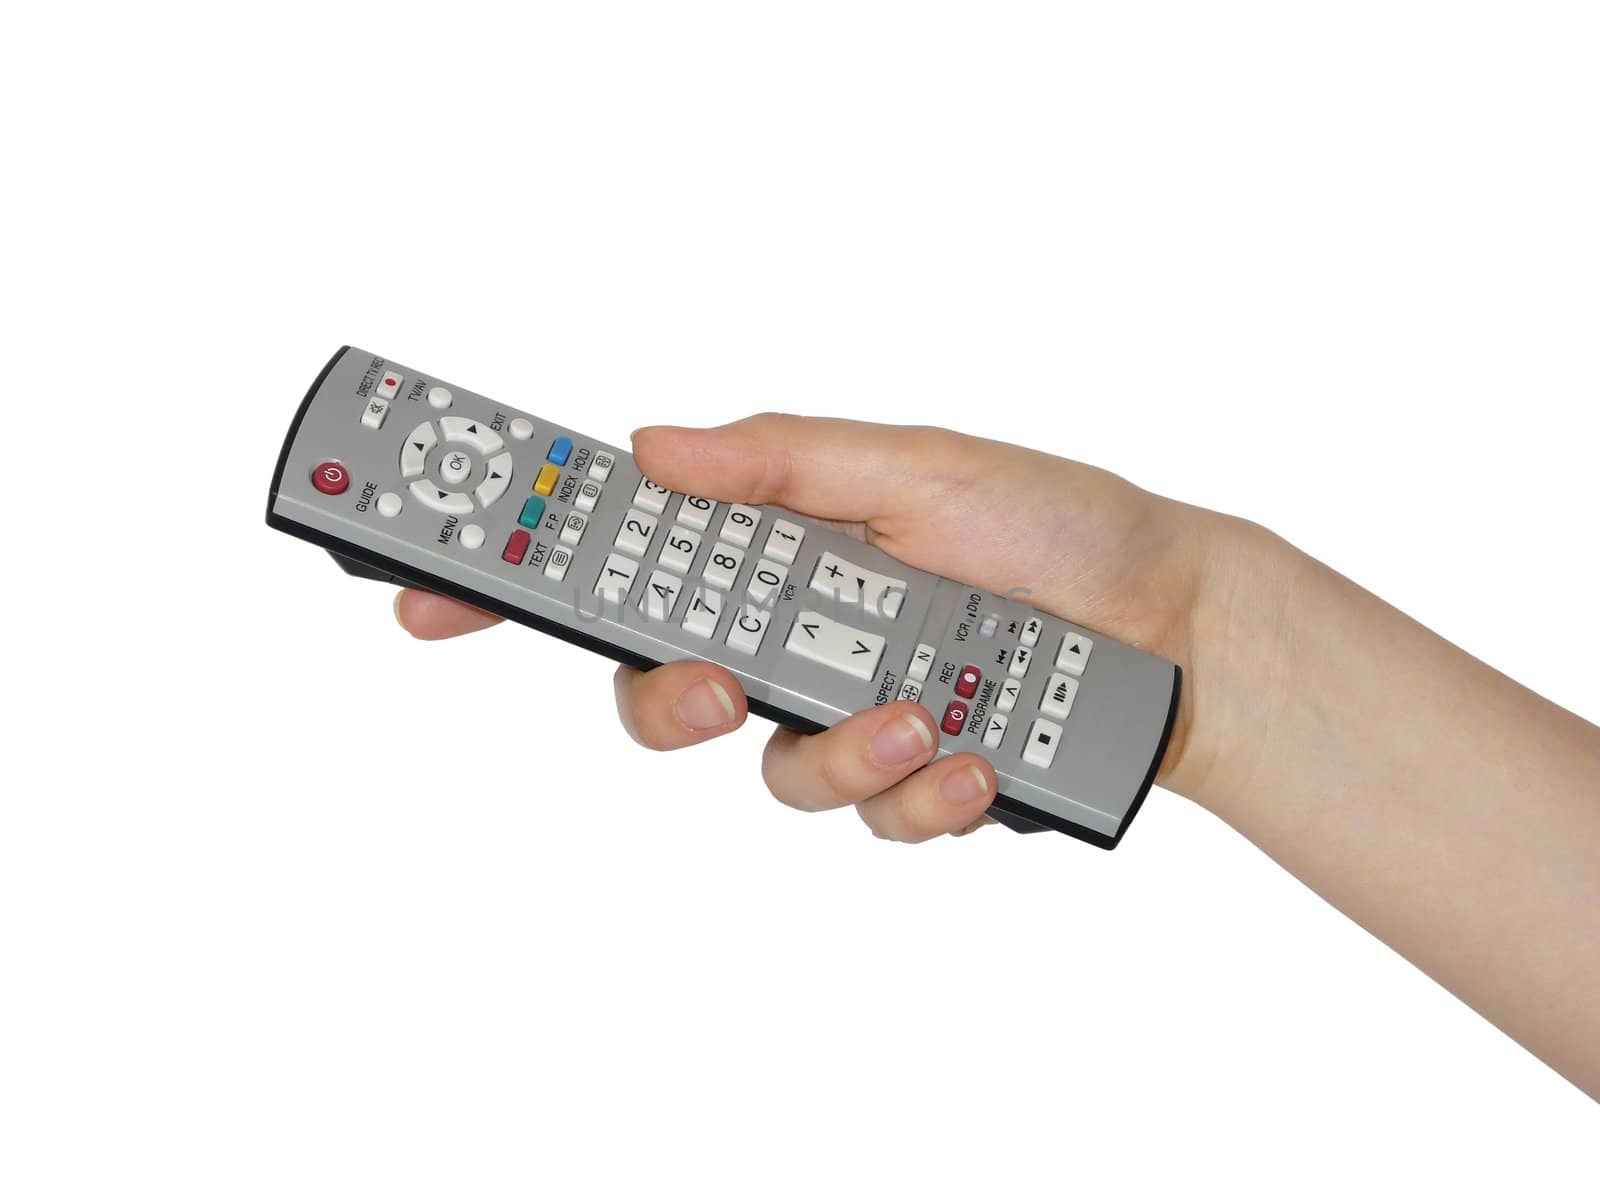 Remote controller in hand by EugenP